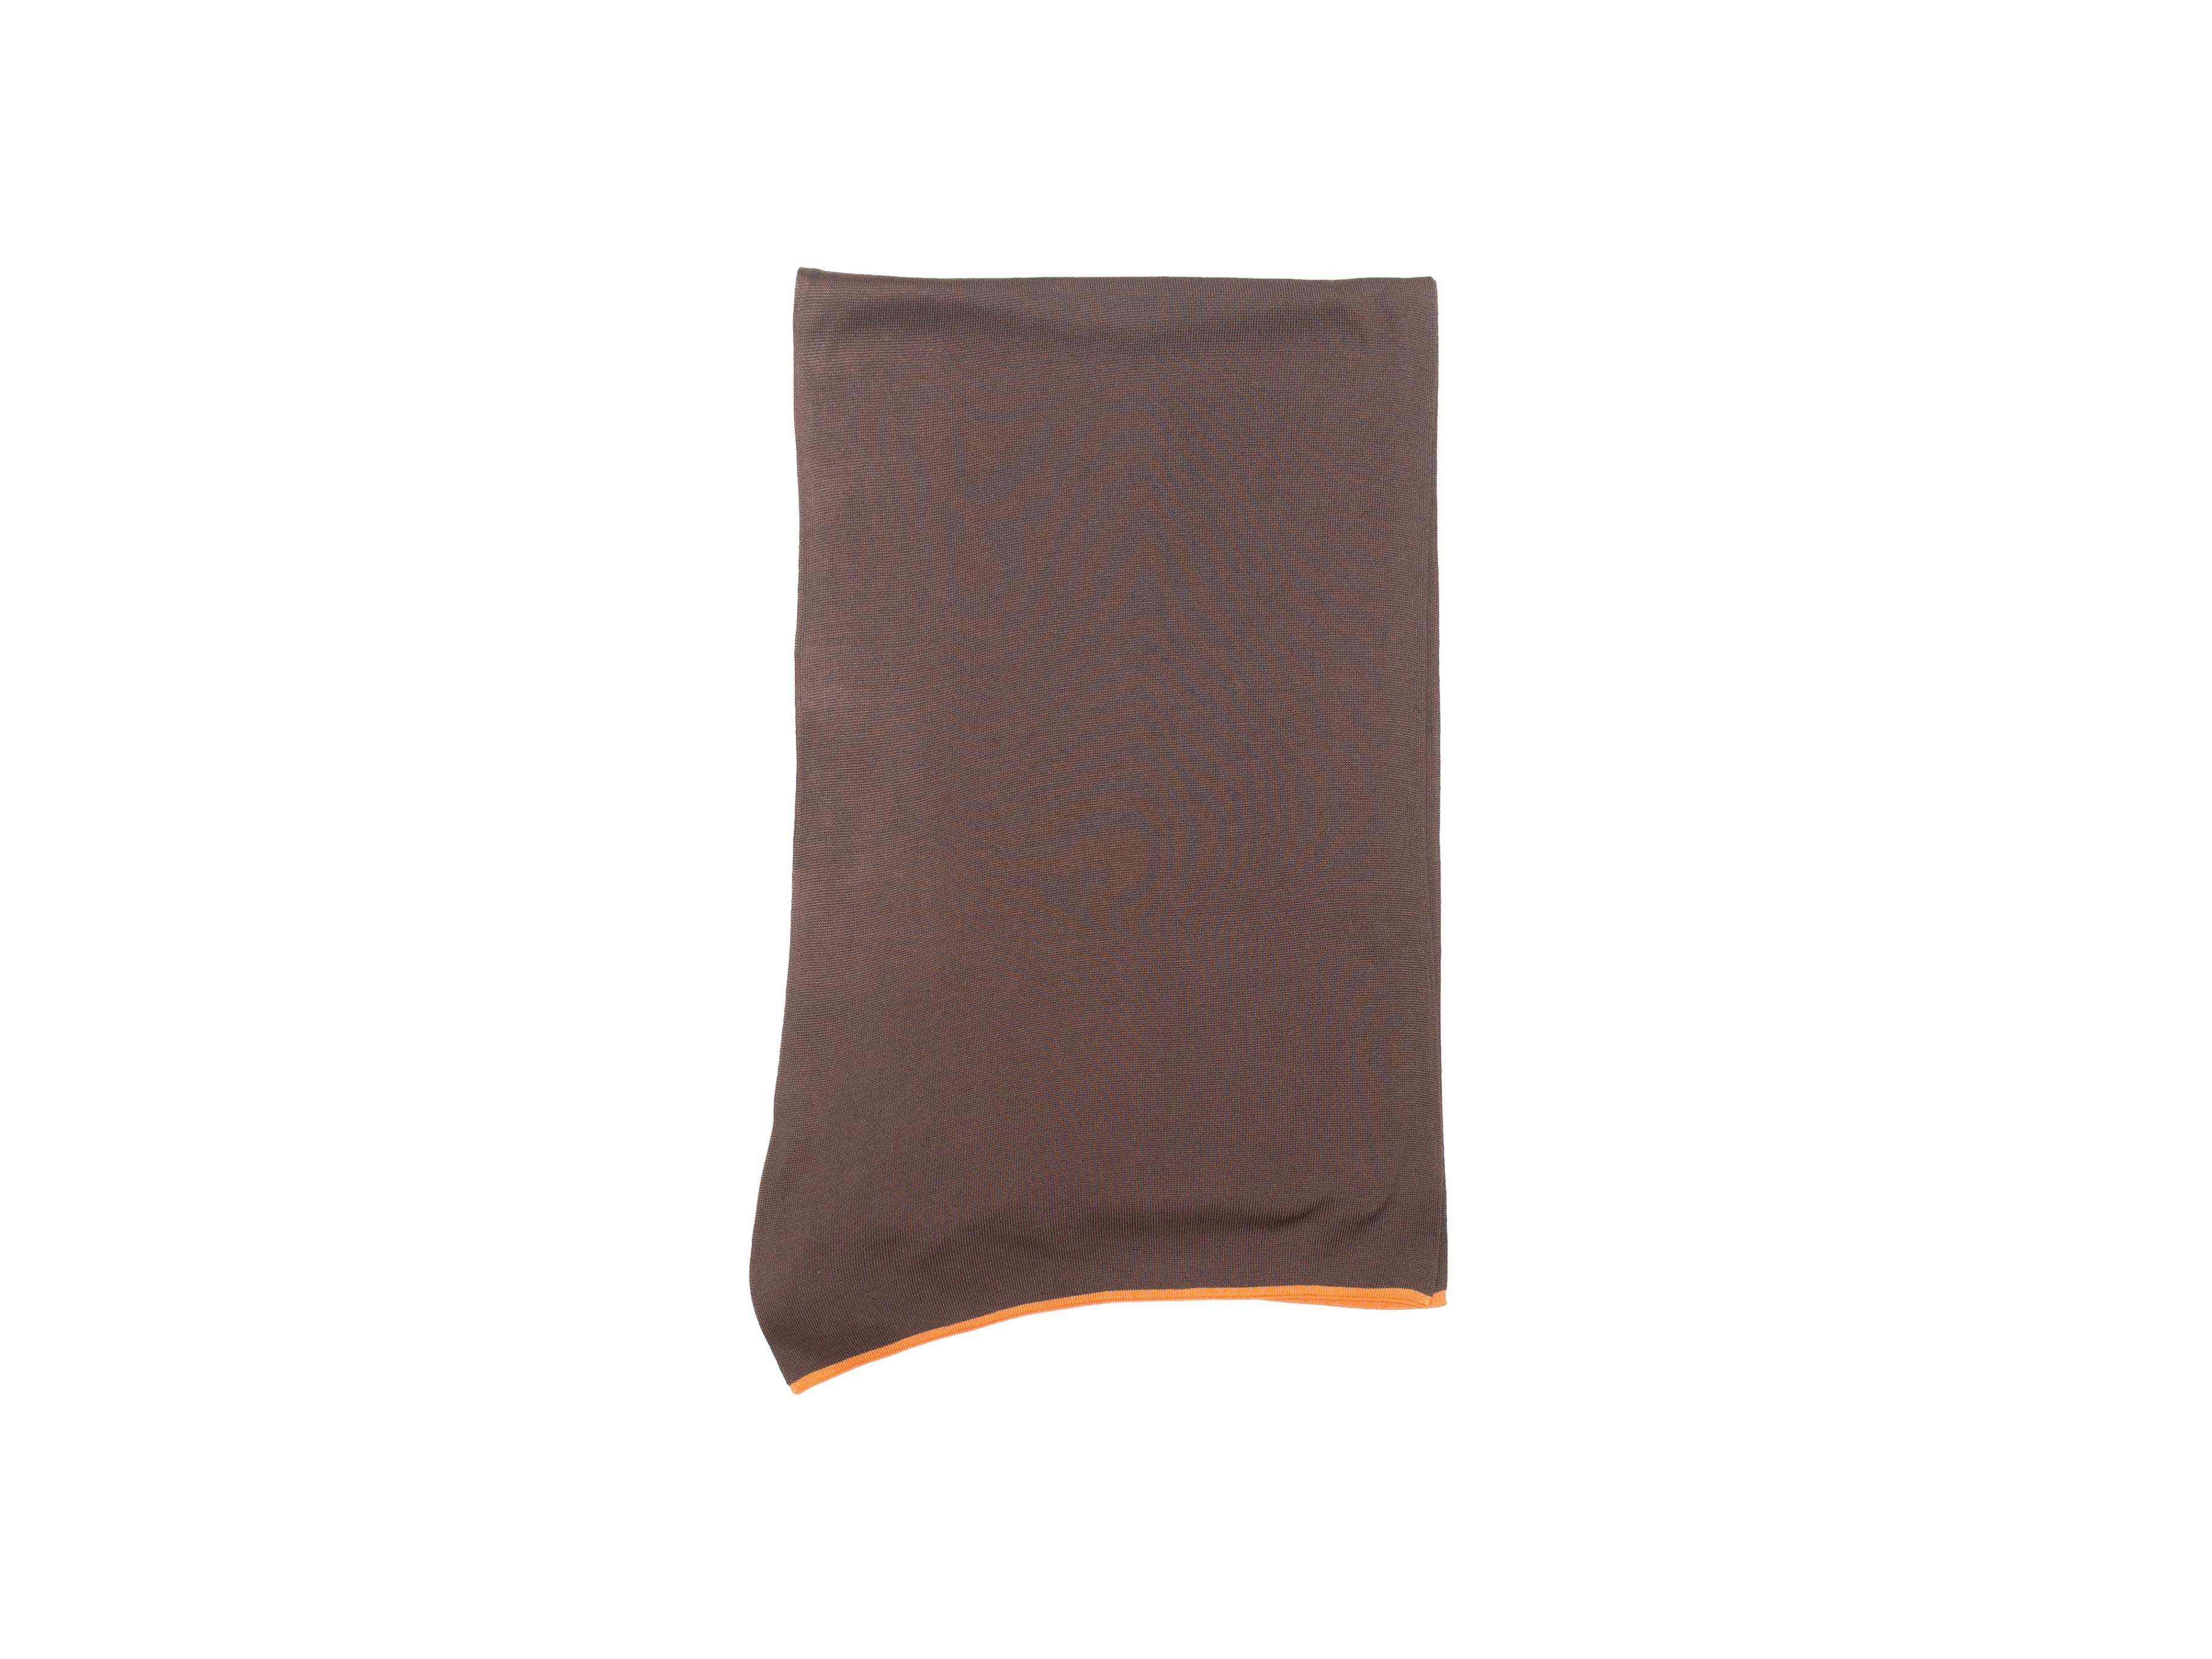 Product details: Brown and orange silk knit scarf by Hermes. 88